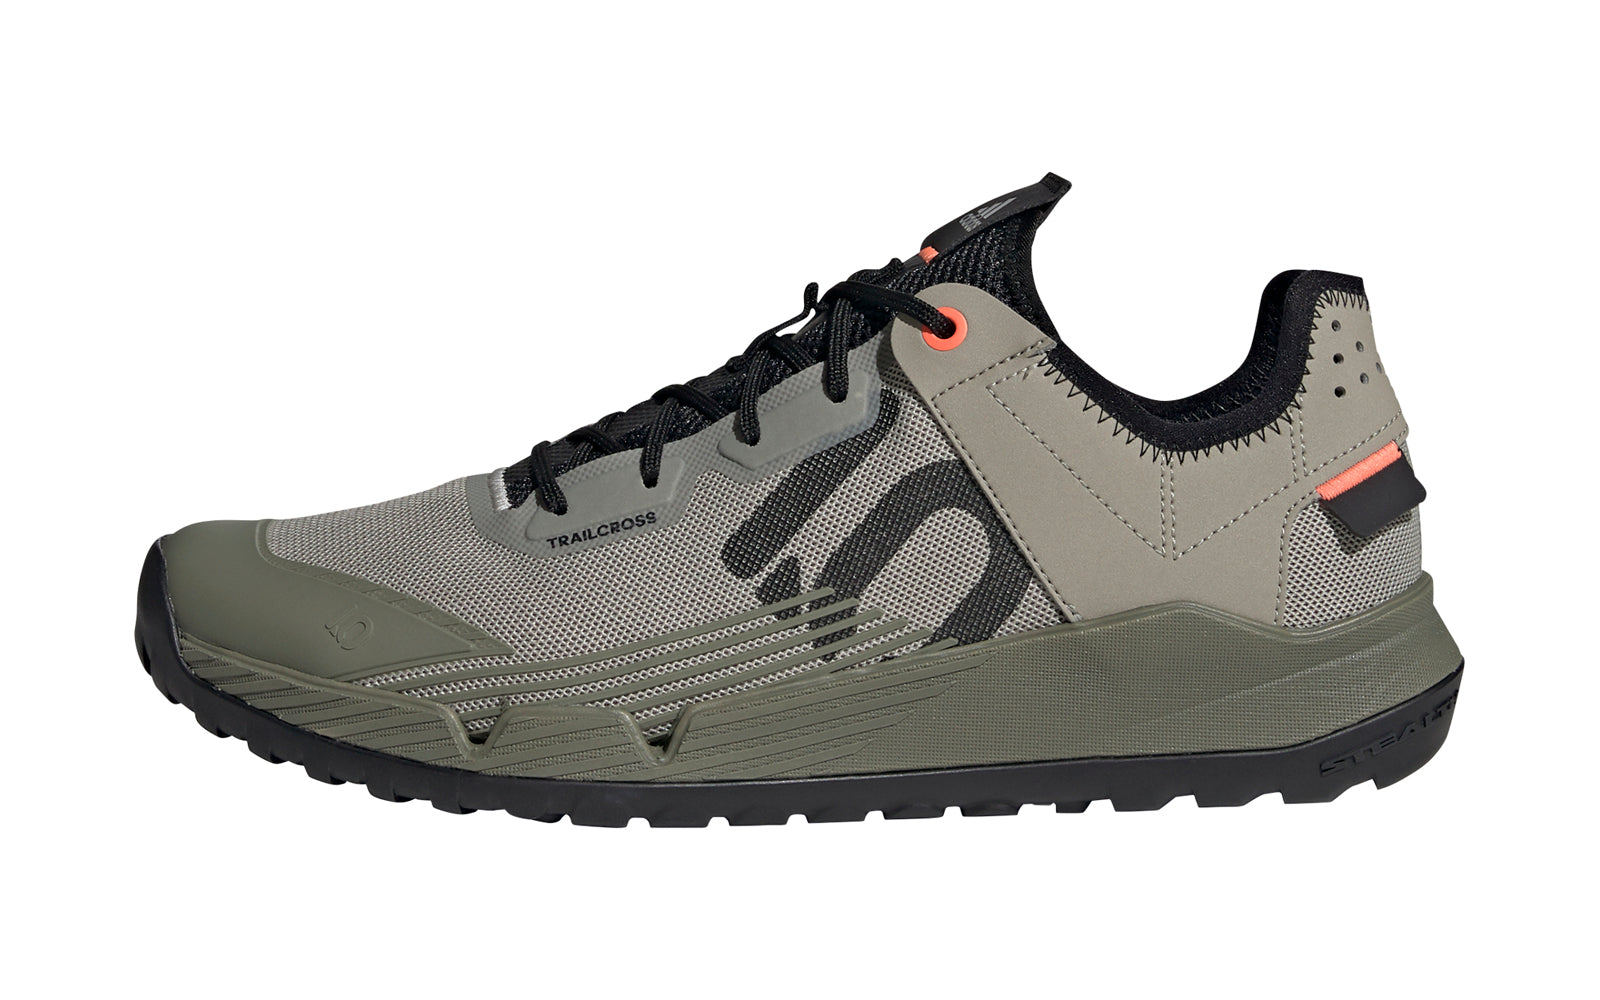 Men's Adidas Five Ten Trailcross LT Mountain Bike Shoe in Feather Grey/Core Black/Signal Coral from the side